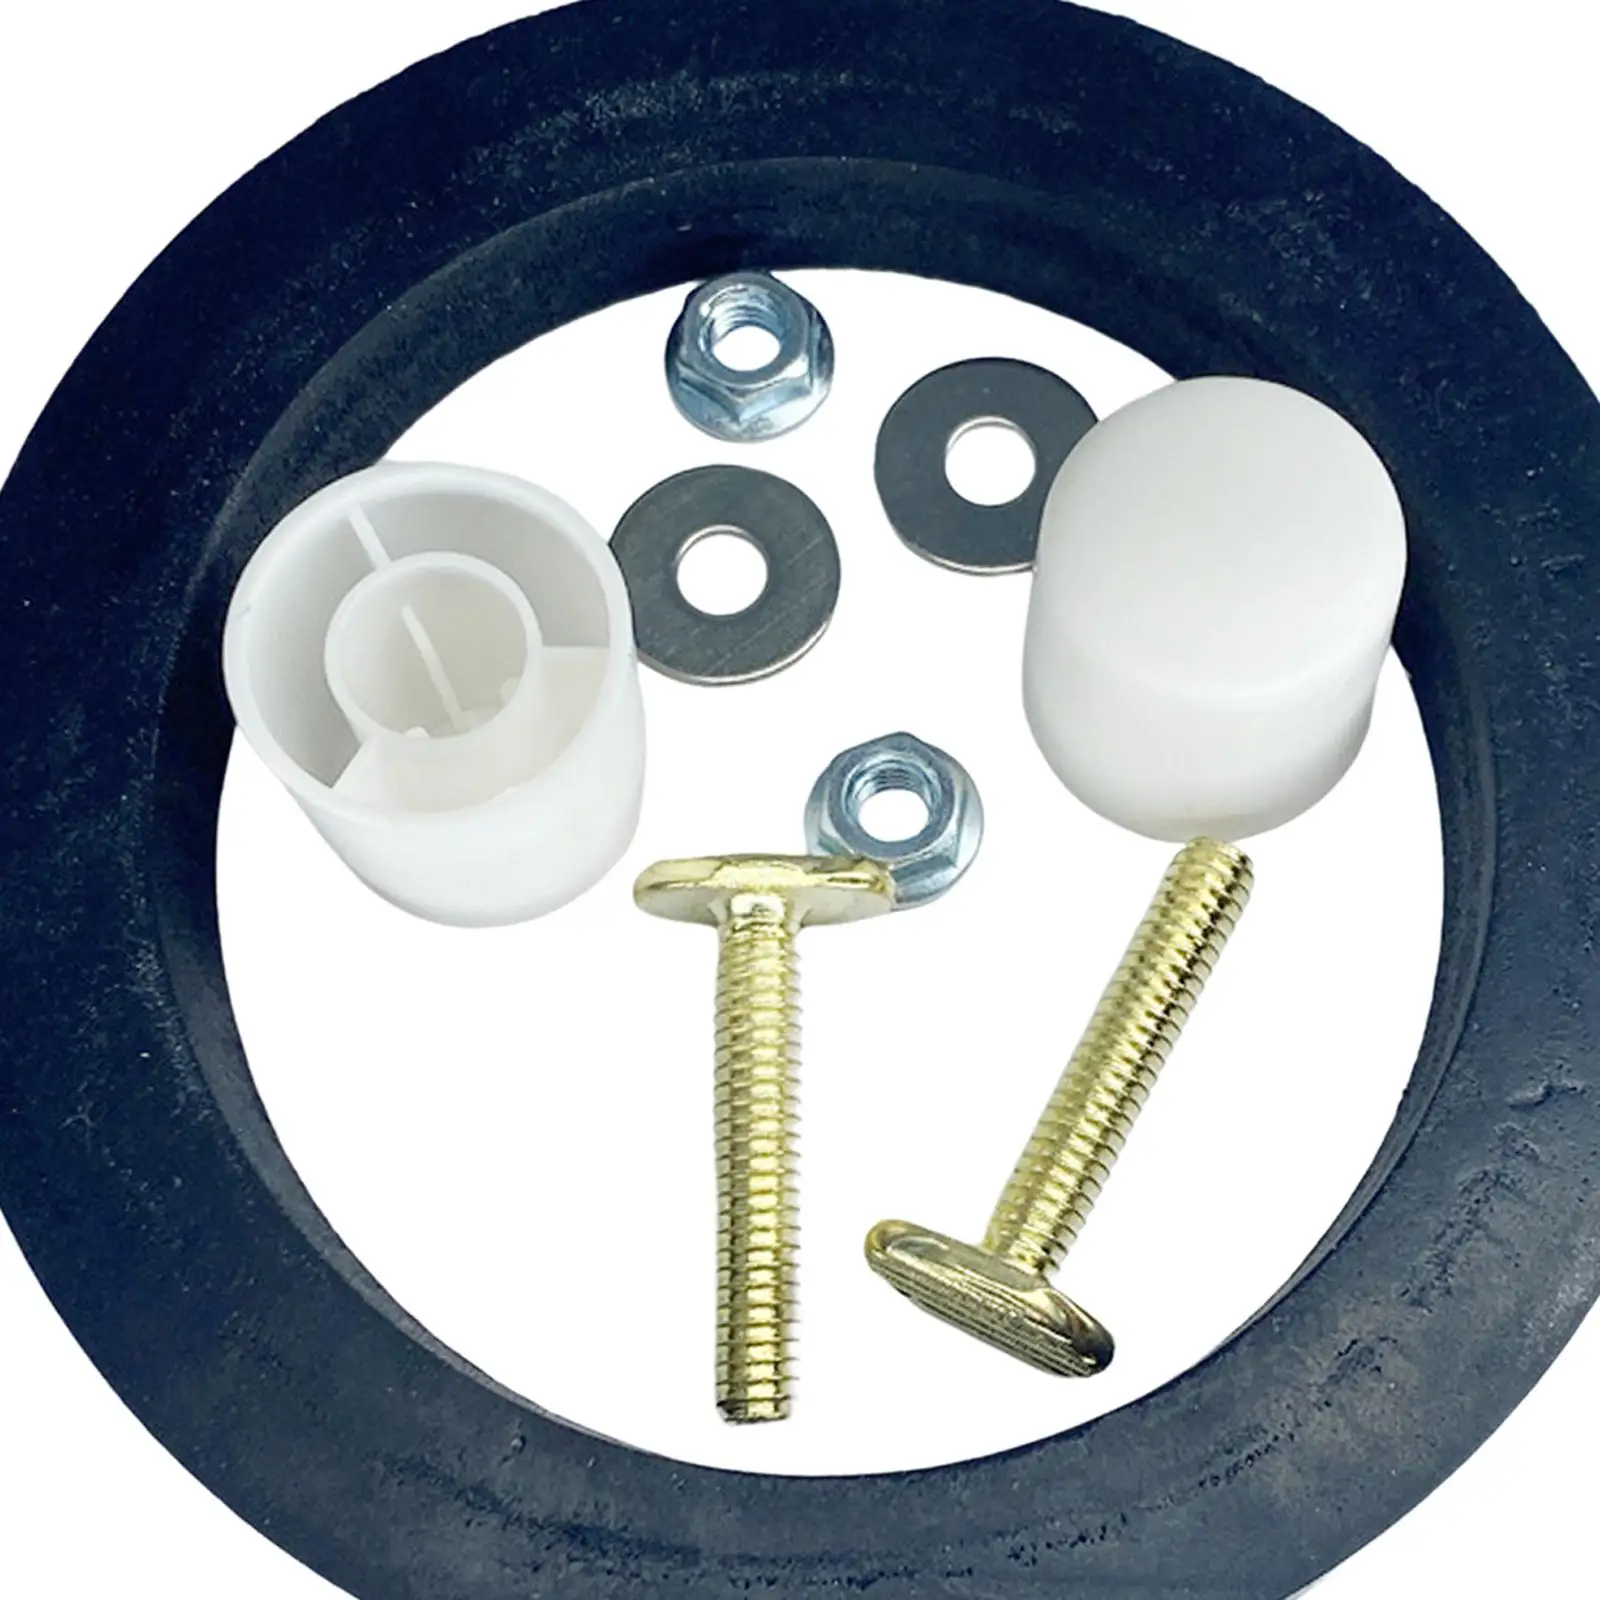 RV Toilet Parts Seal Kit for 300, 310, 320 Series Flush Ball Seal Durable